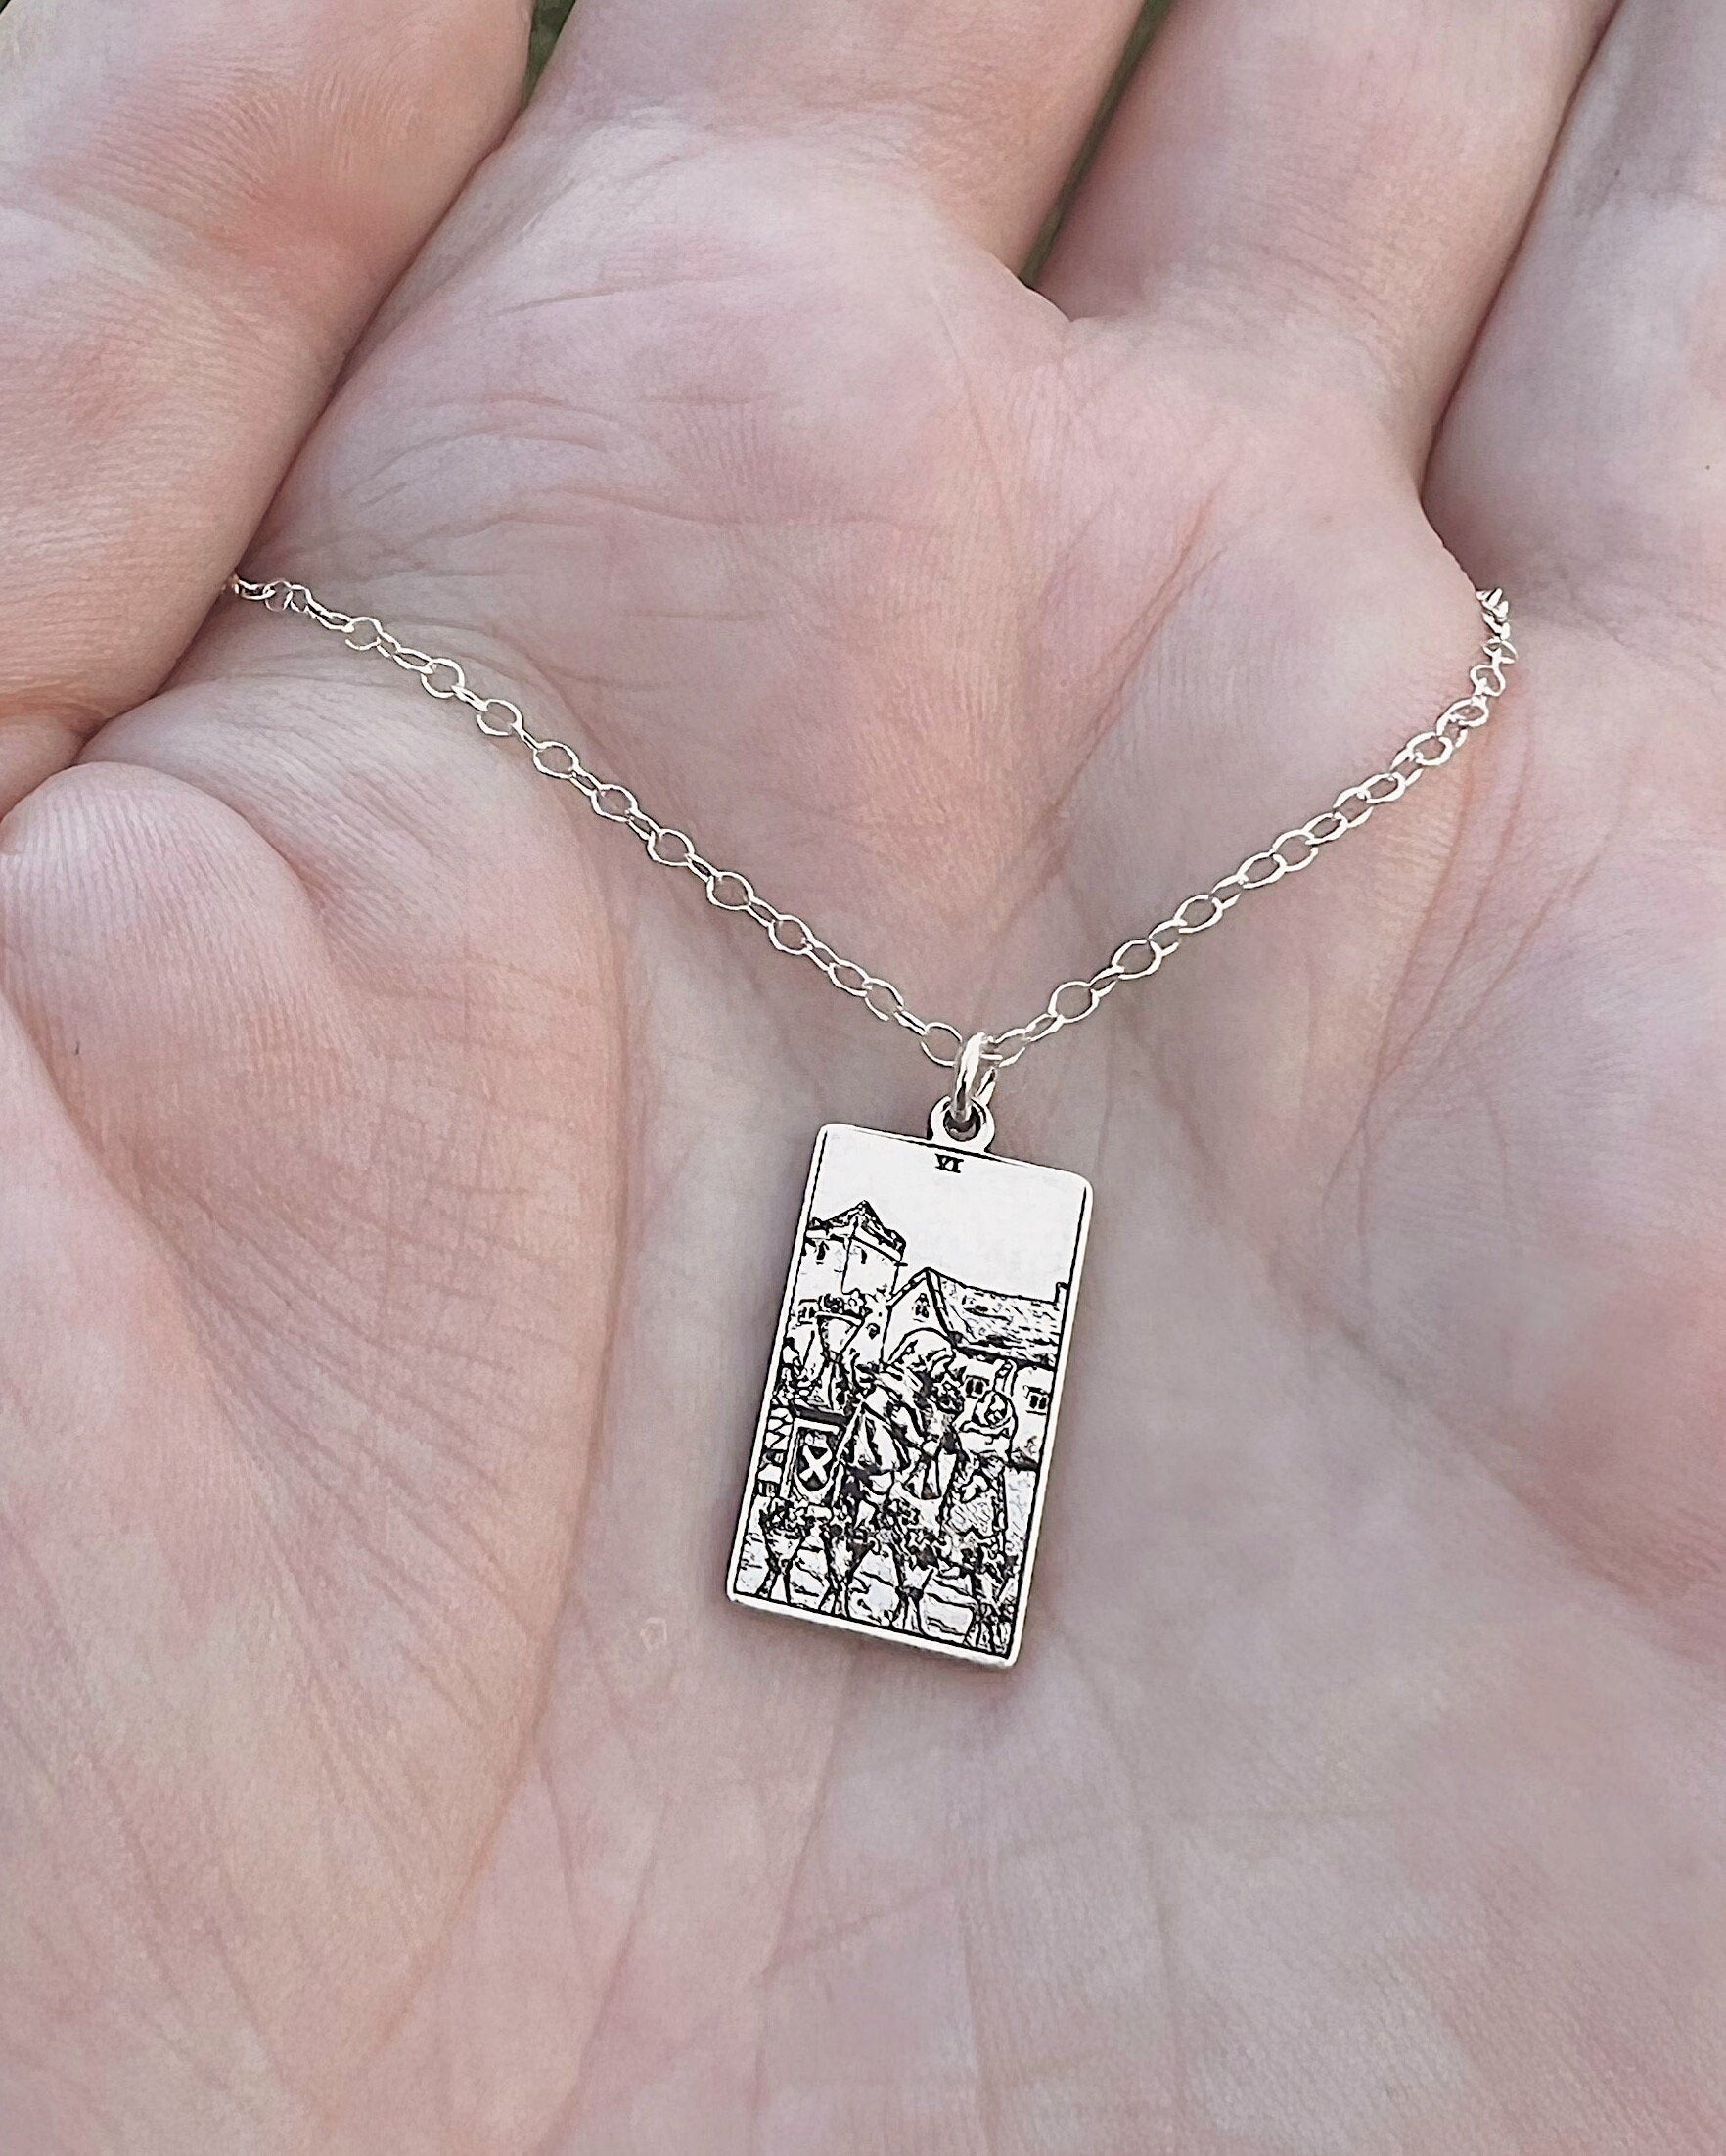 Six of Cups Tarot Card Necklace - Sterling Silver